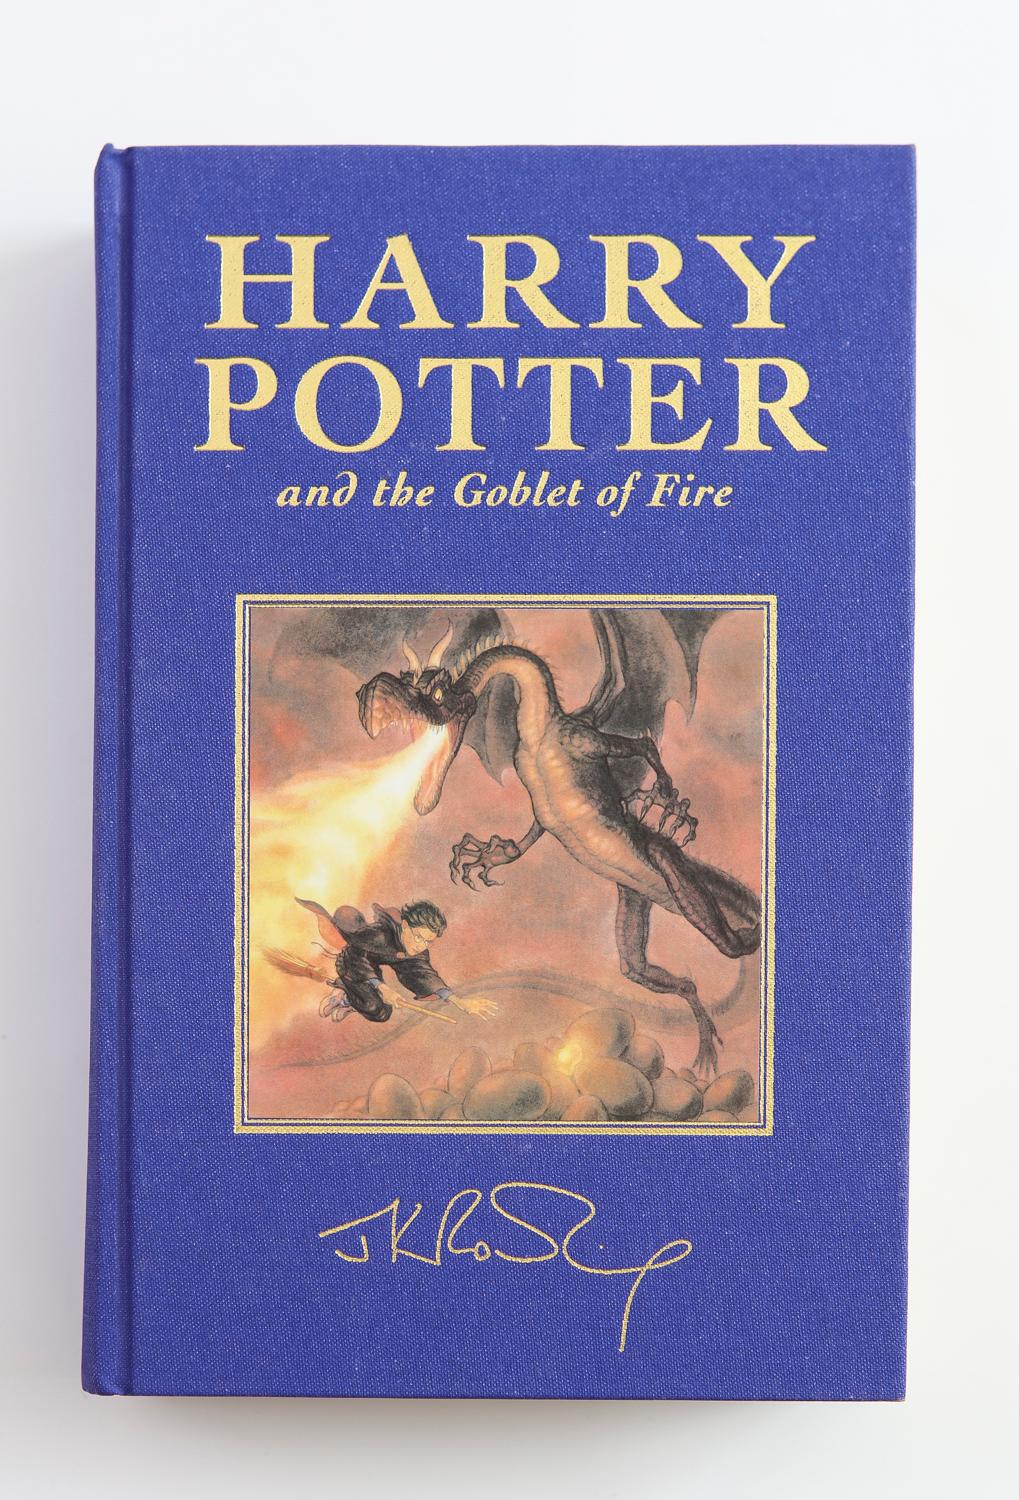 Harry Potter And The Goblet Of Fire Book 4 Special Edition Von J K Rowling New Hardcover 2000 1st Edition Allstarsbooks